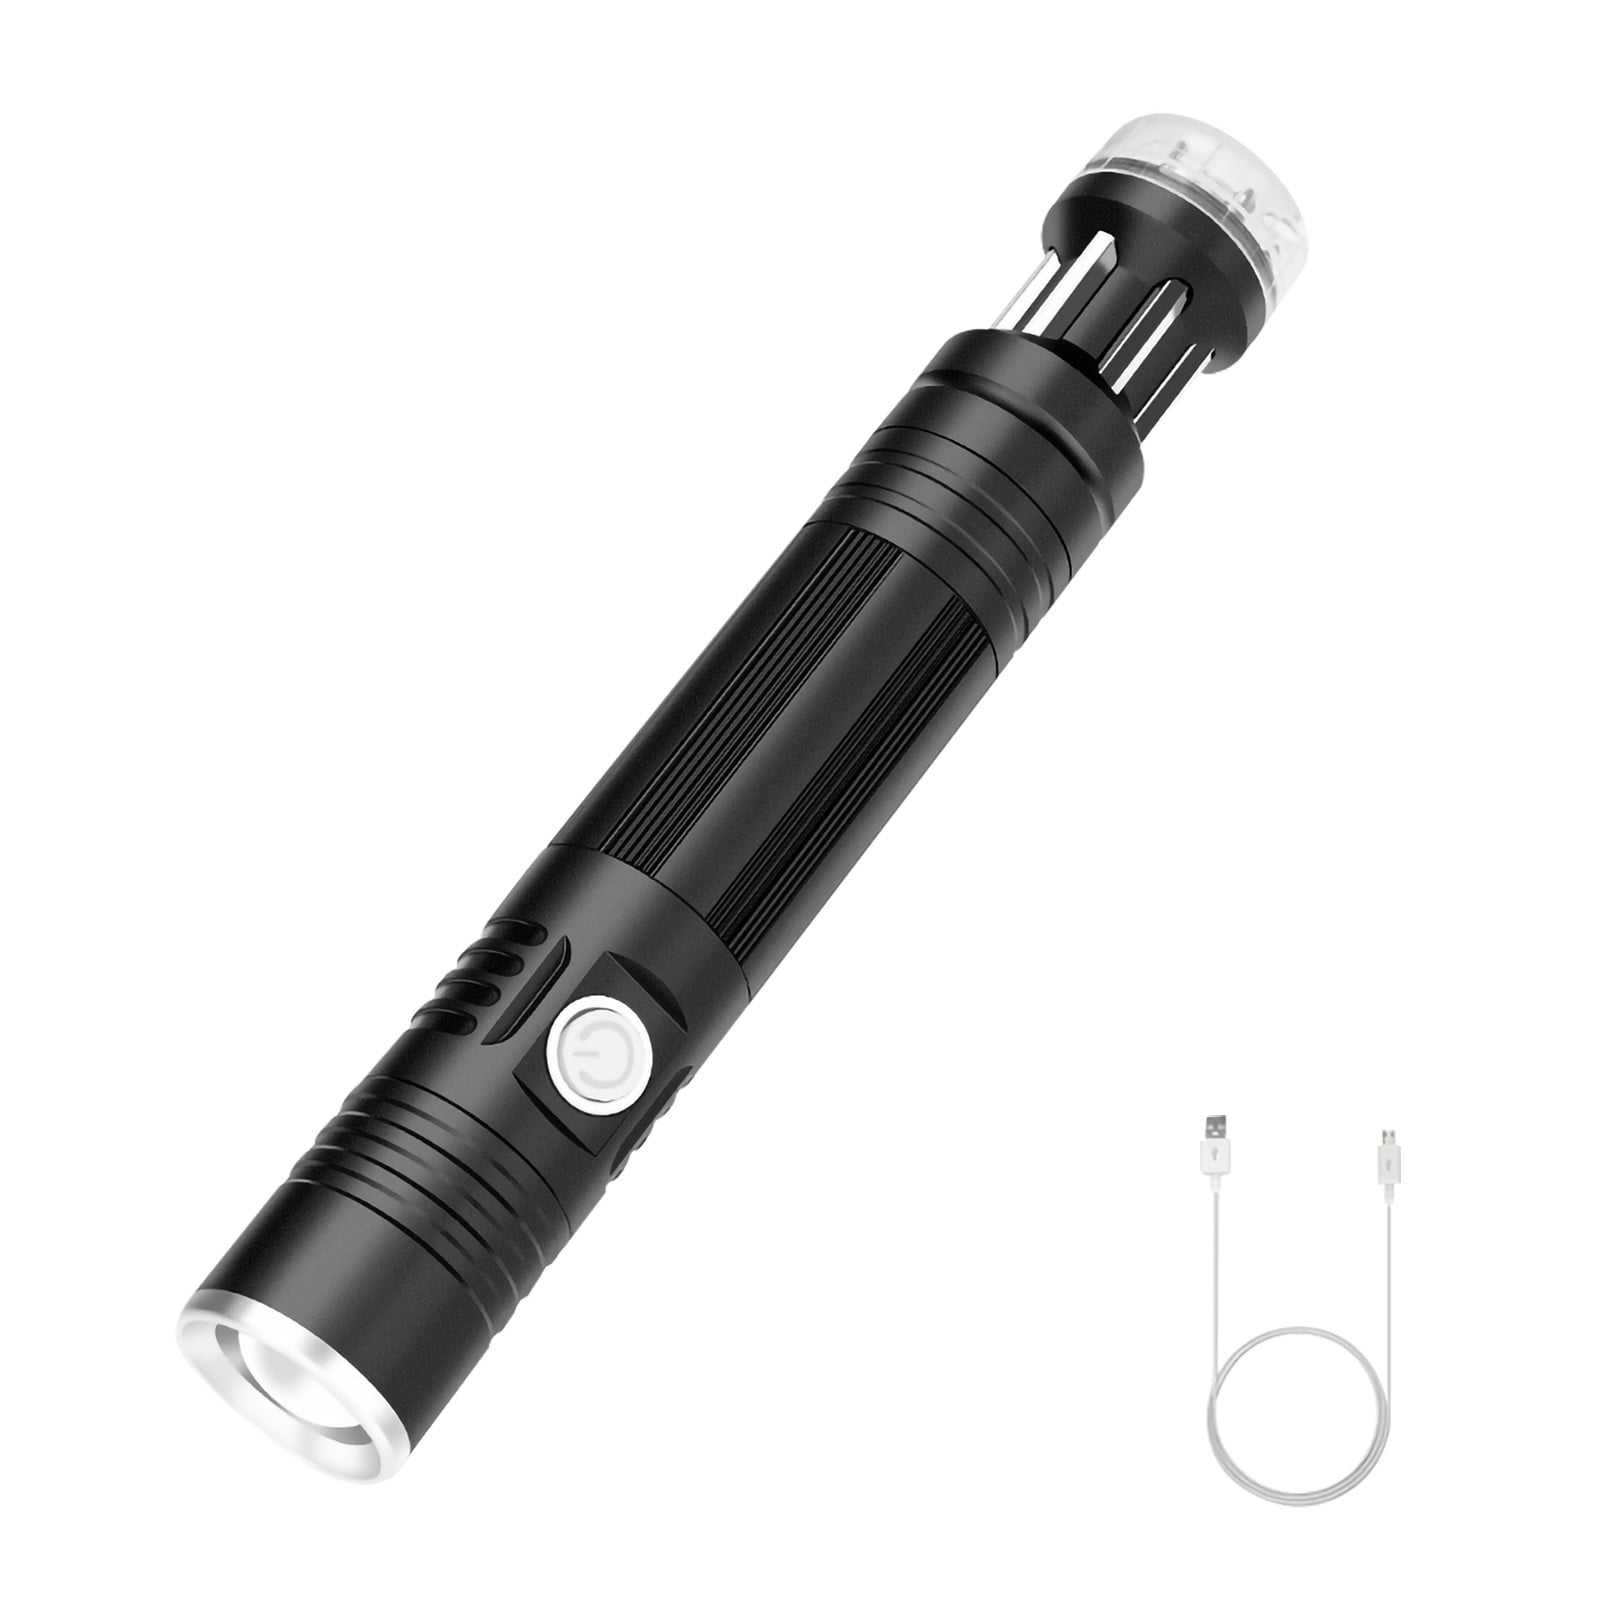 Bay Hydro Super Bright WHITE LED Torch FlashLight High-Intensity Compact Design 